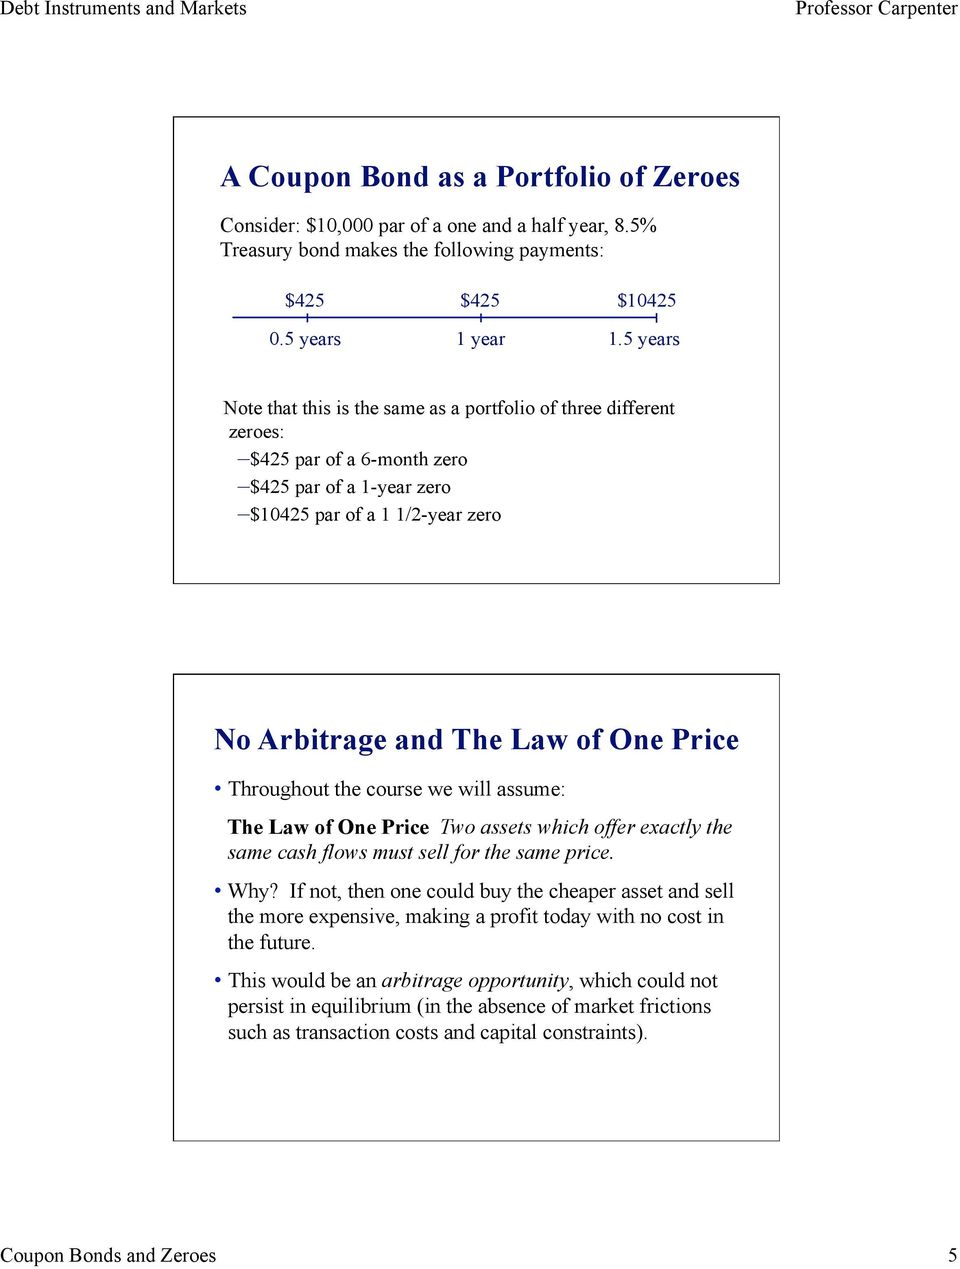 Throughout the course we will assume: The Law of One Price Two assets which offer exactly the same cash flows must sell for the same price. Why?